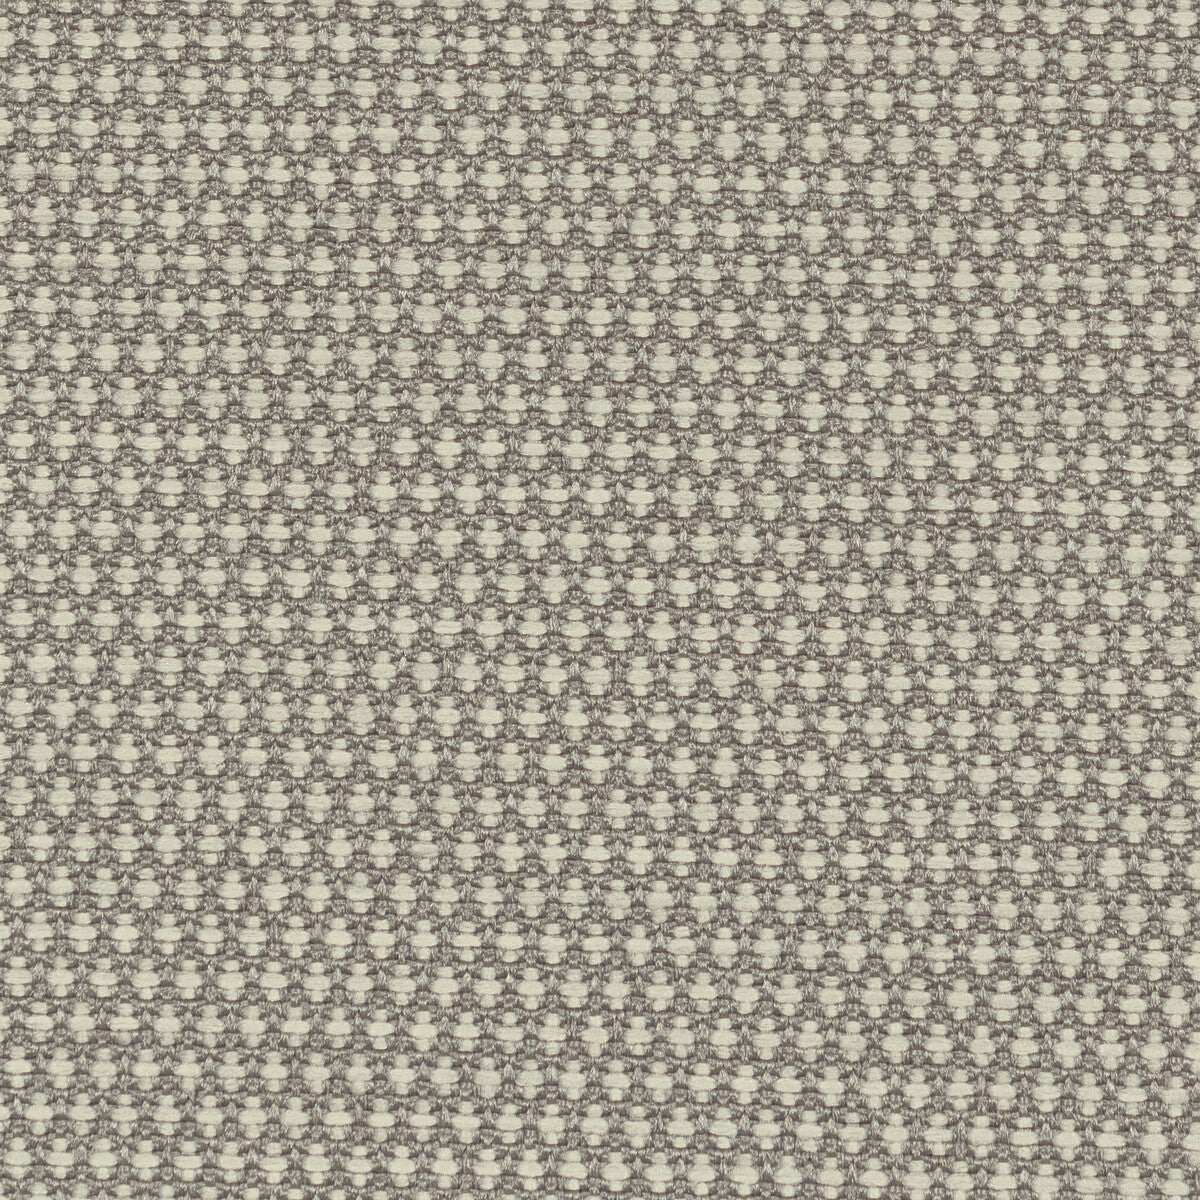 Mobilize fabric in pumice color - pattern 36256.106.0 - by Kravet Contract in the Supreen collection